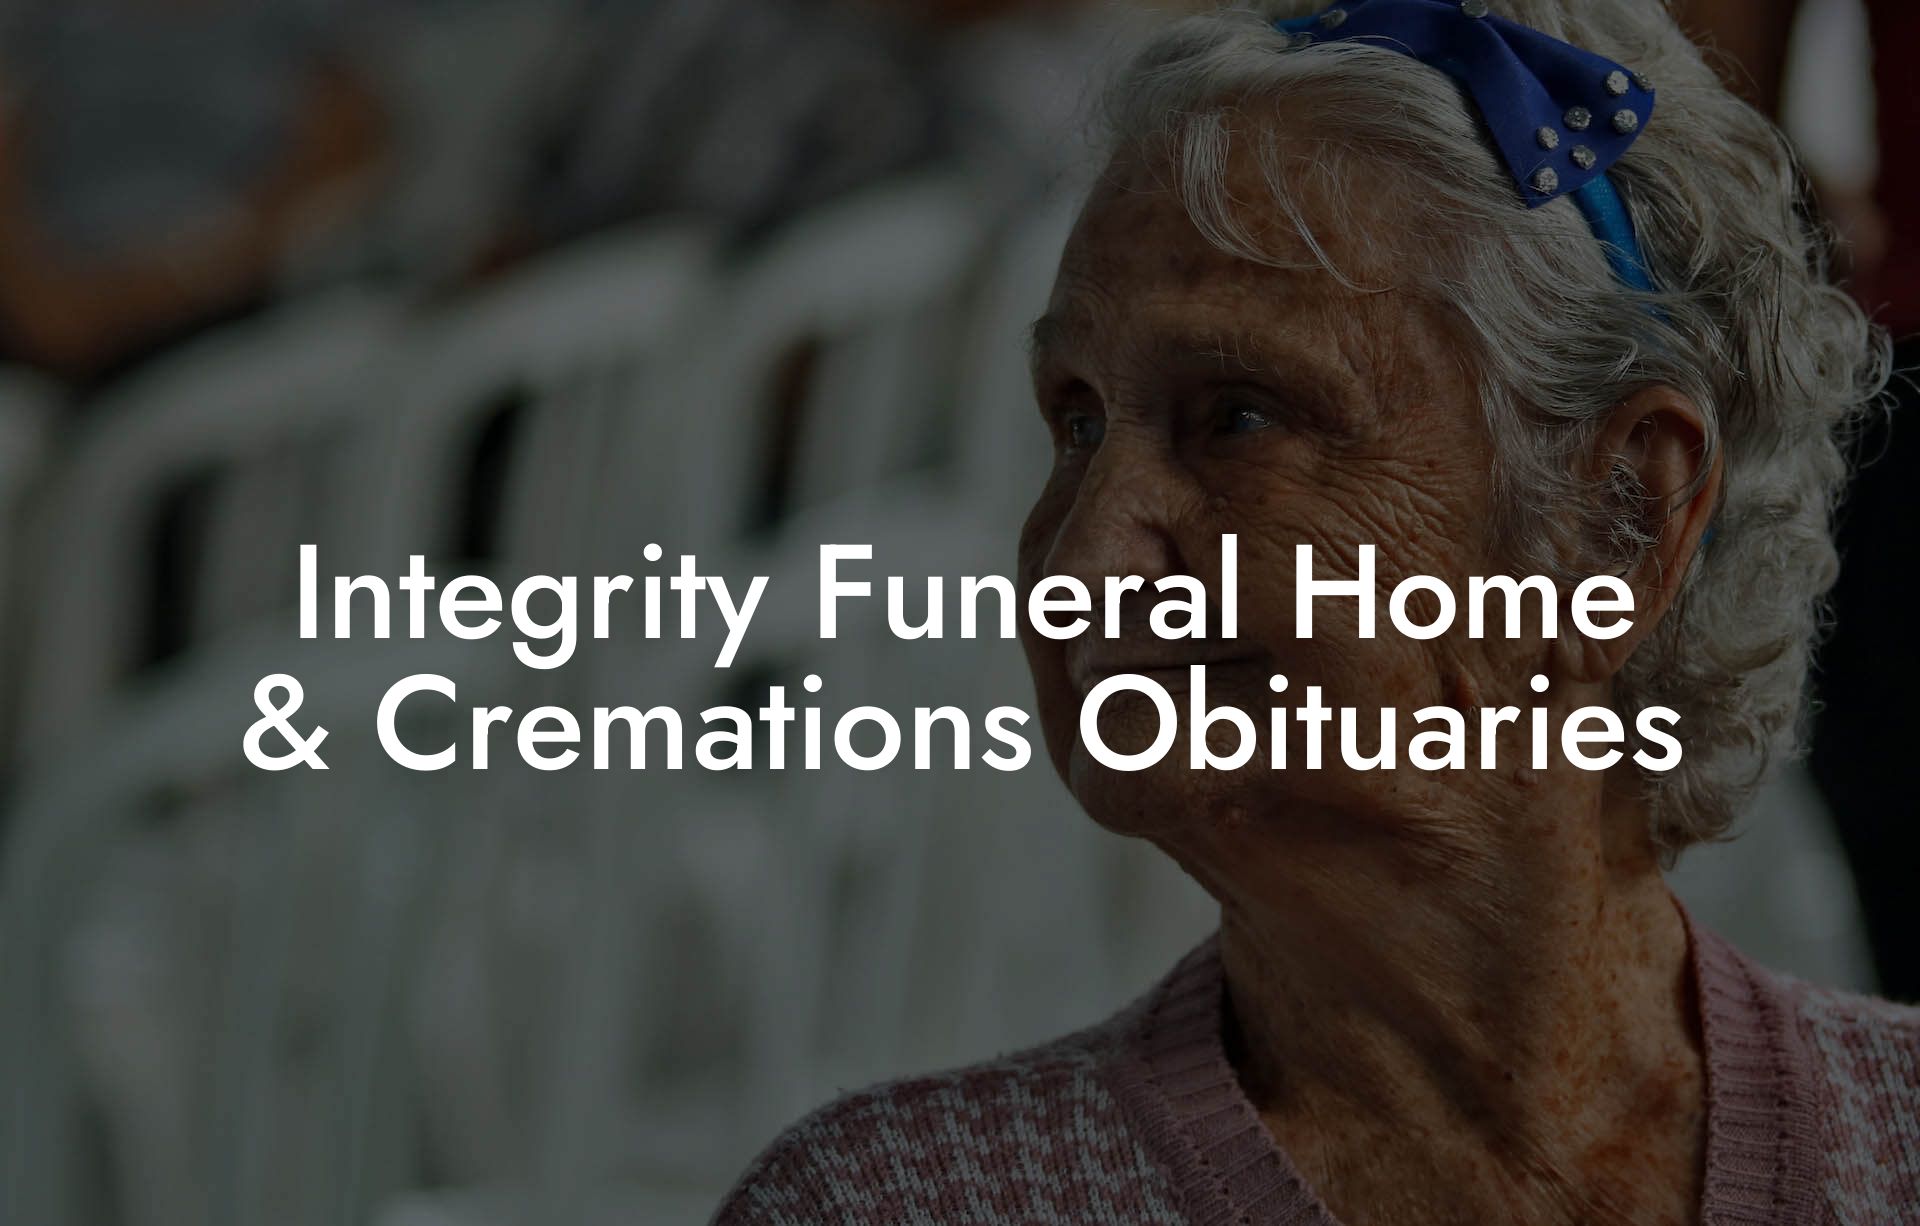 Integrity Funeral Home & Cremations Obituaries